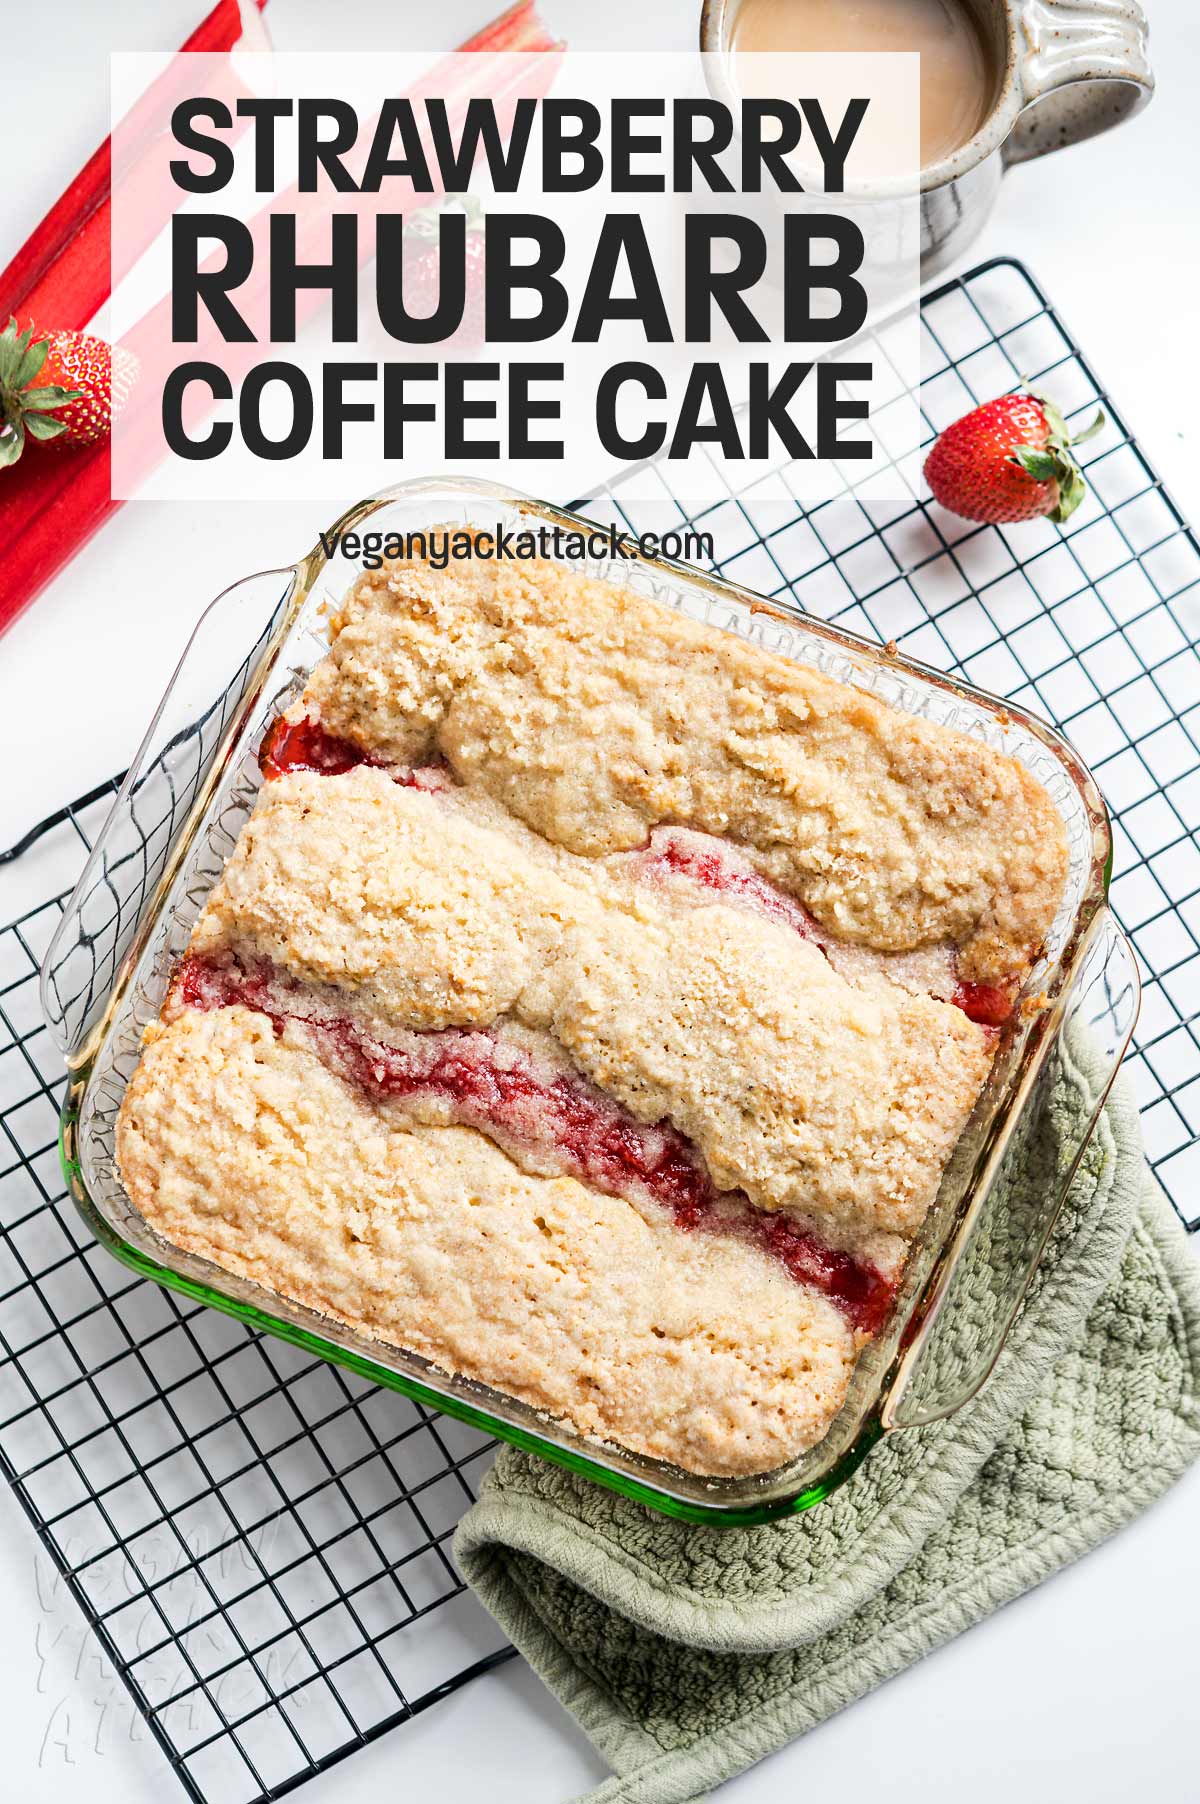 Strawberry rhubarb coffee cake in a glass casserole dish on a cooling rack with text overlay